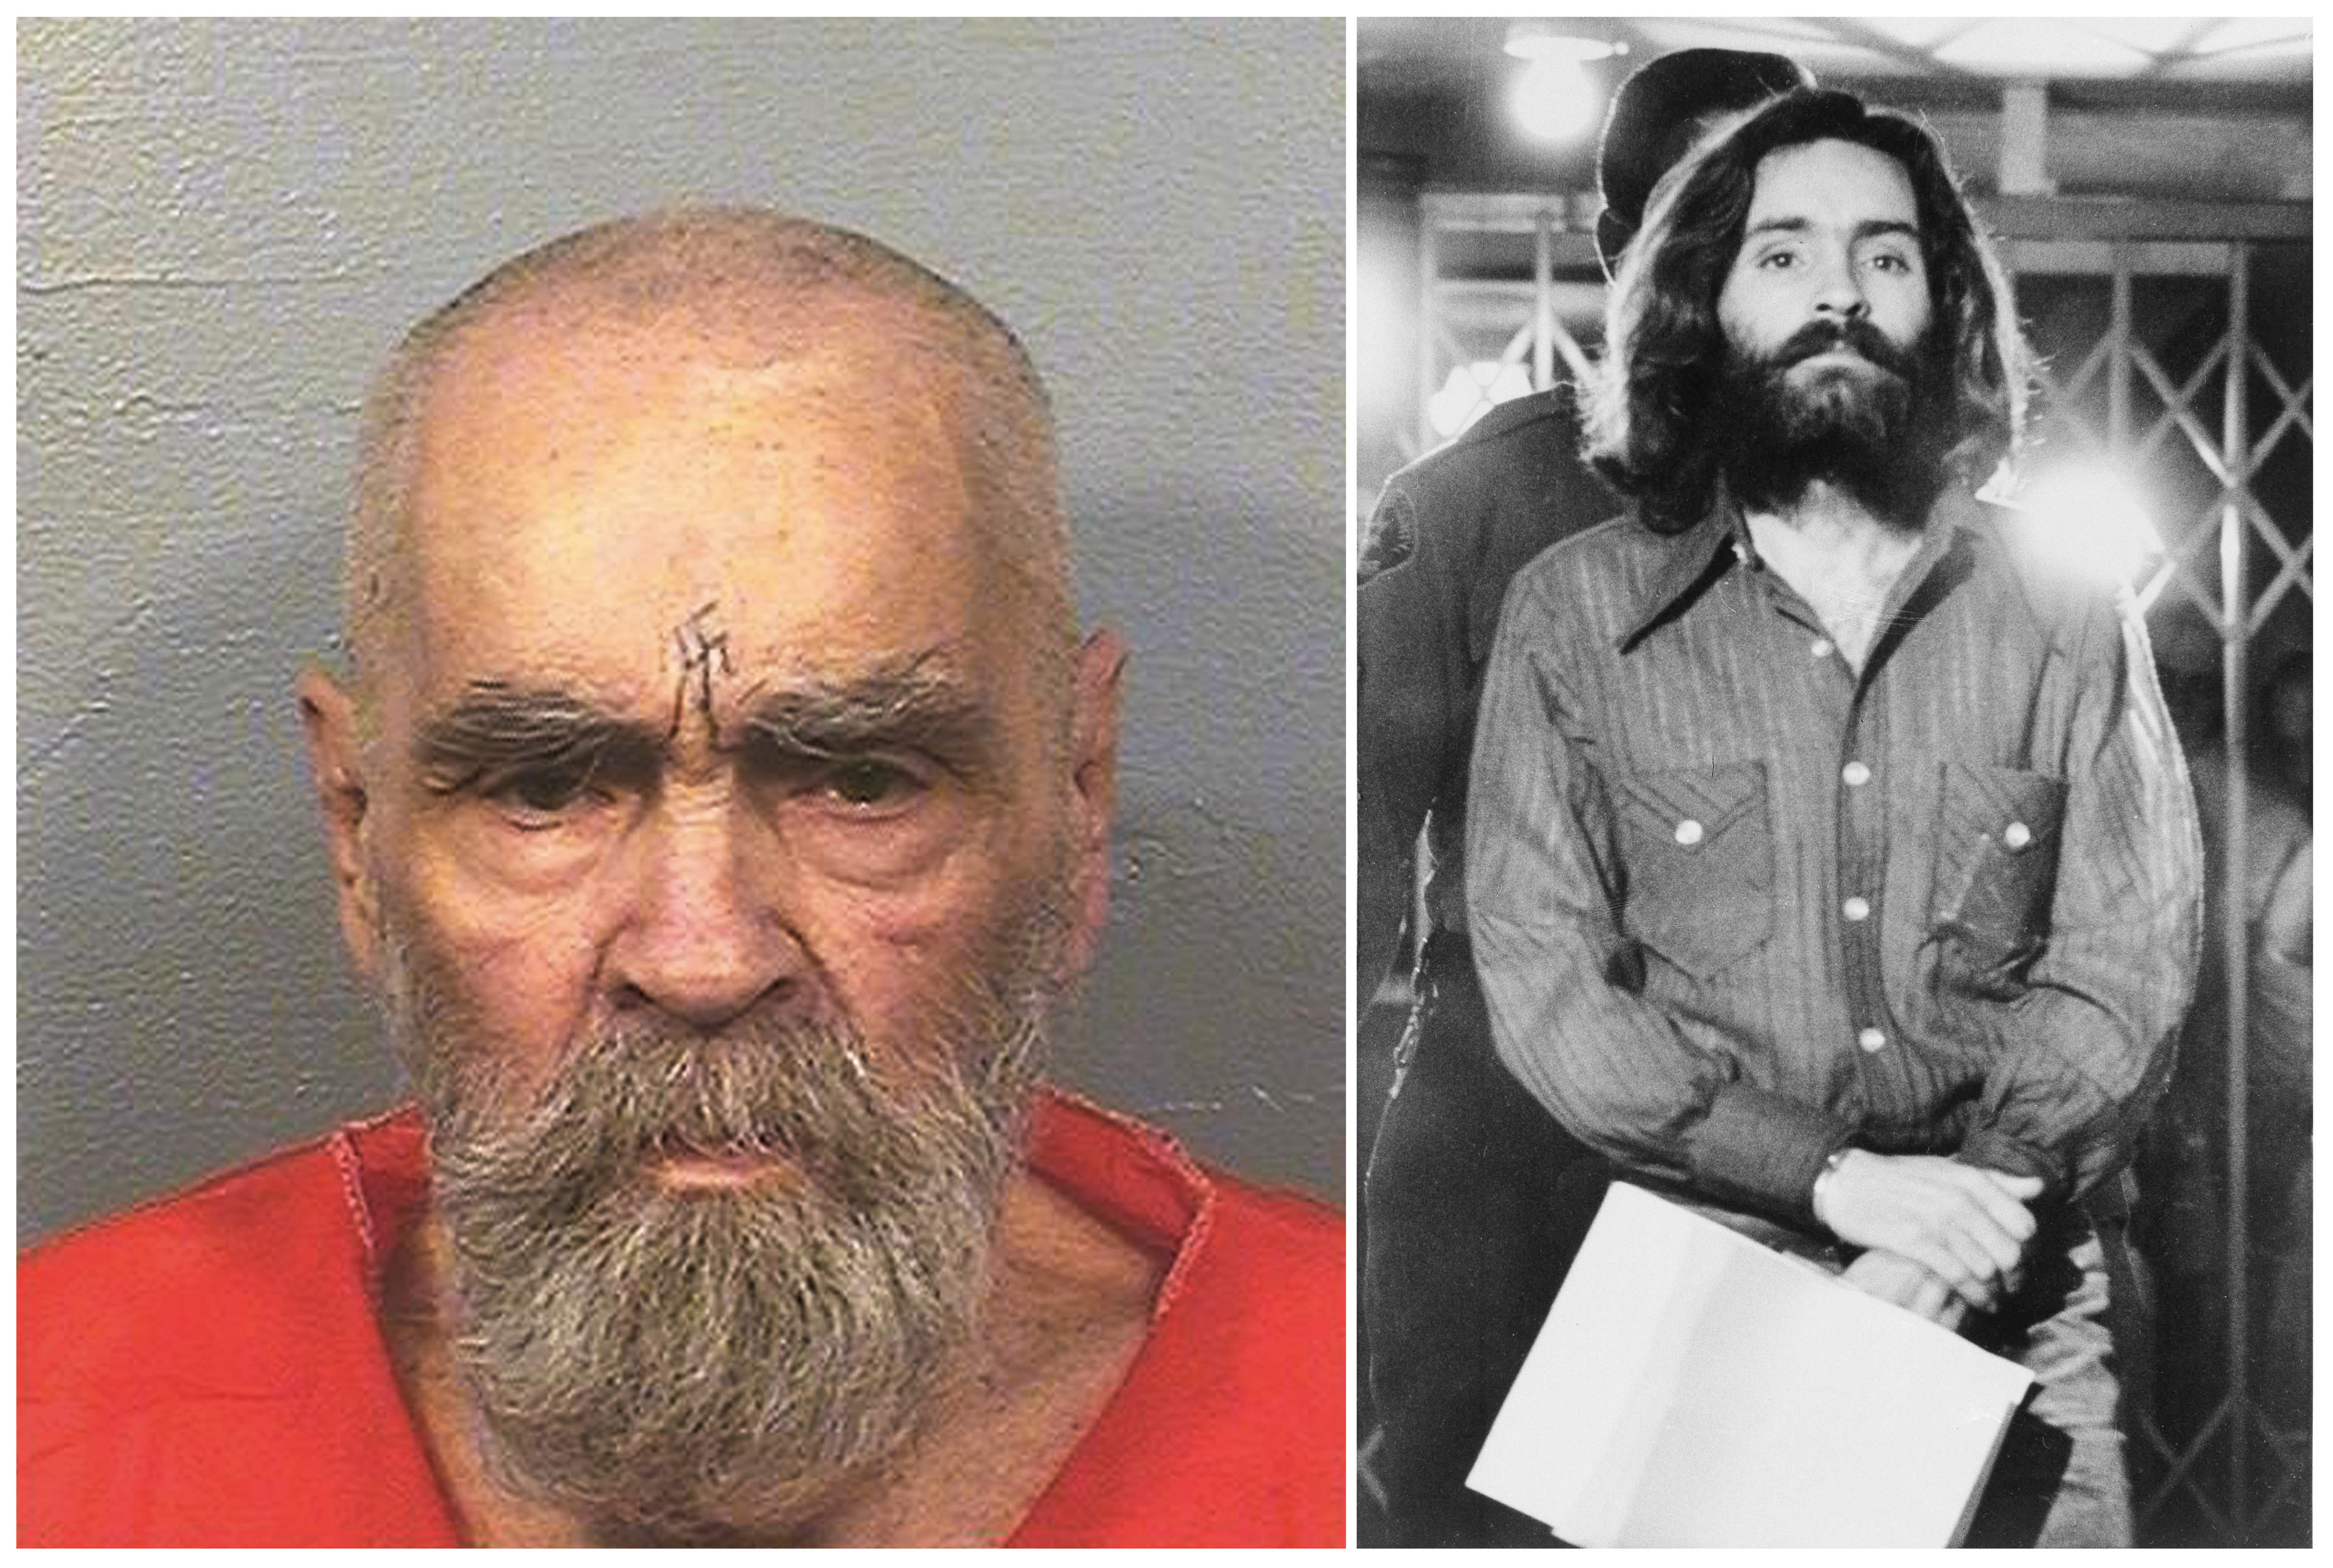 AP Was There: Charles Manson, followers convicted of murder